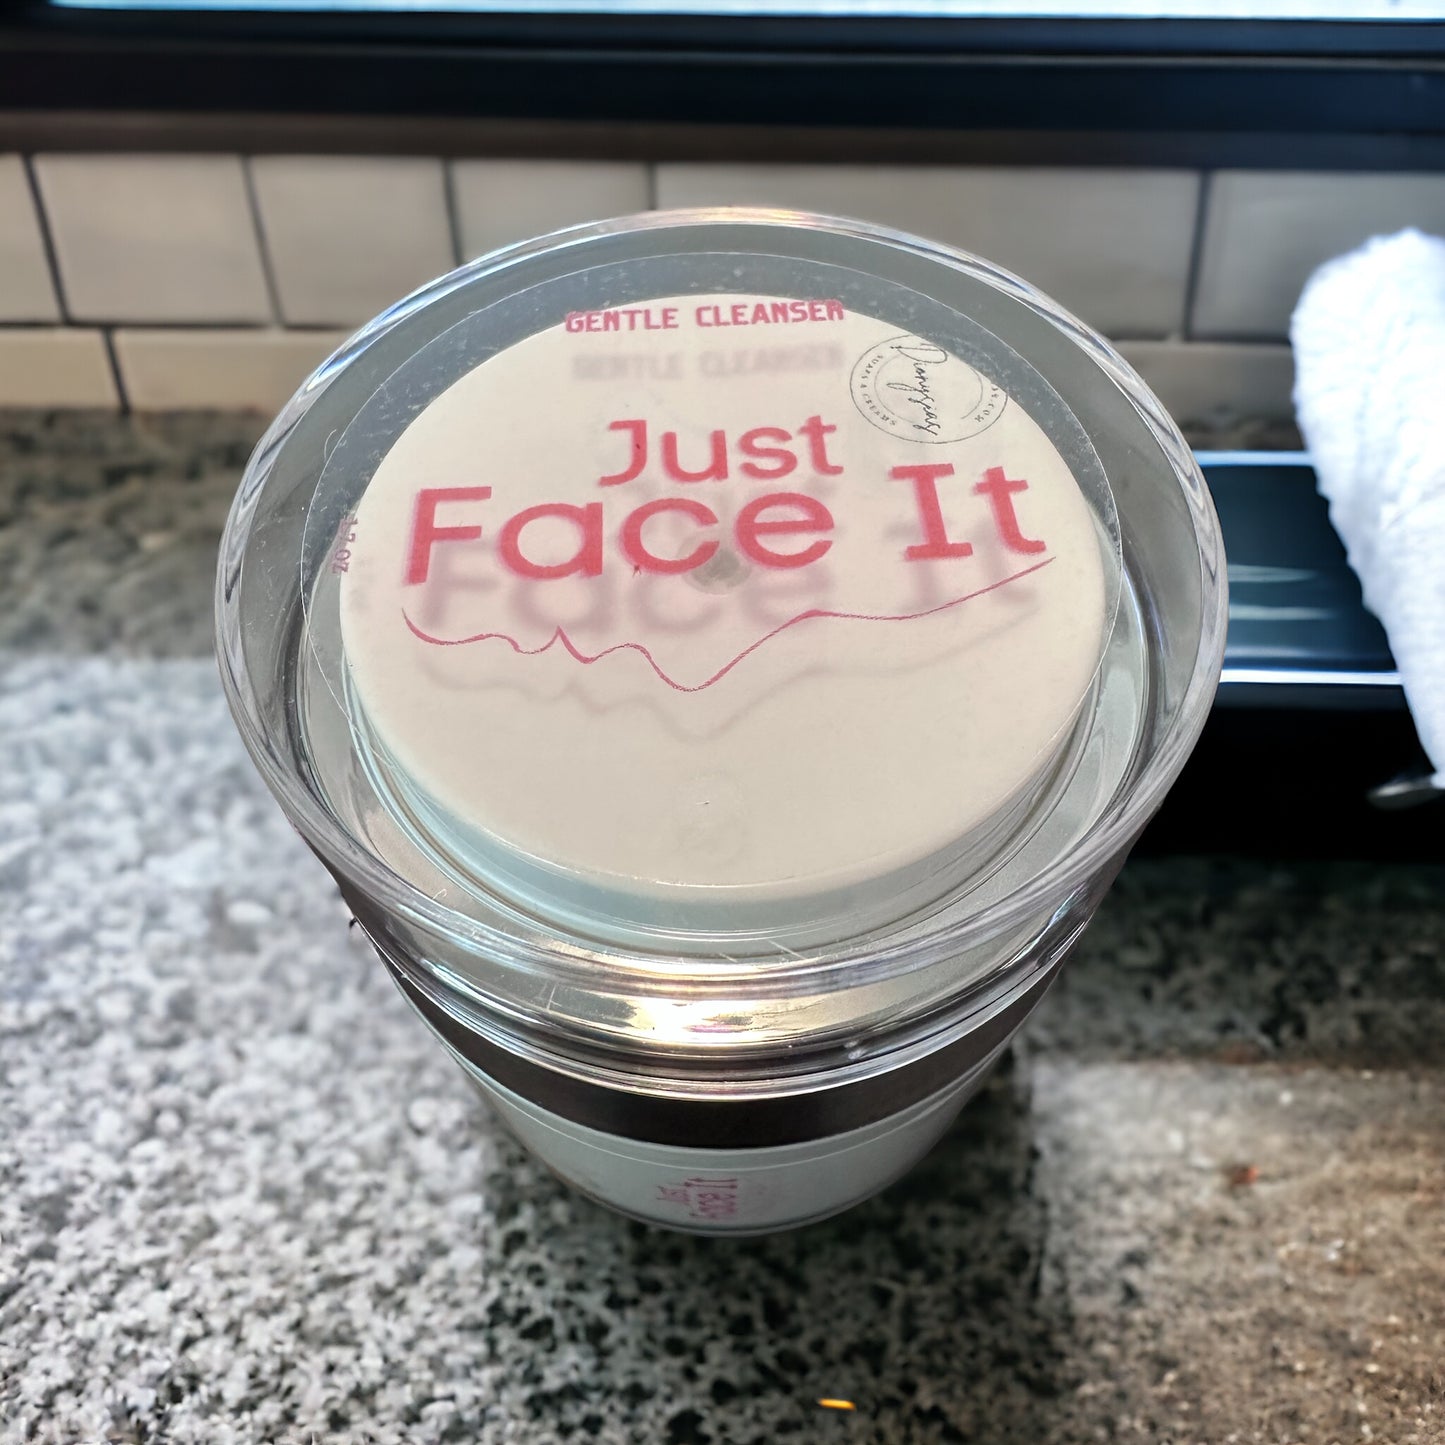 Just Face It (gentle cleanser)